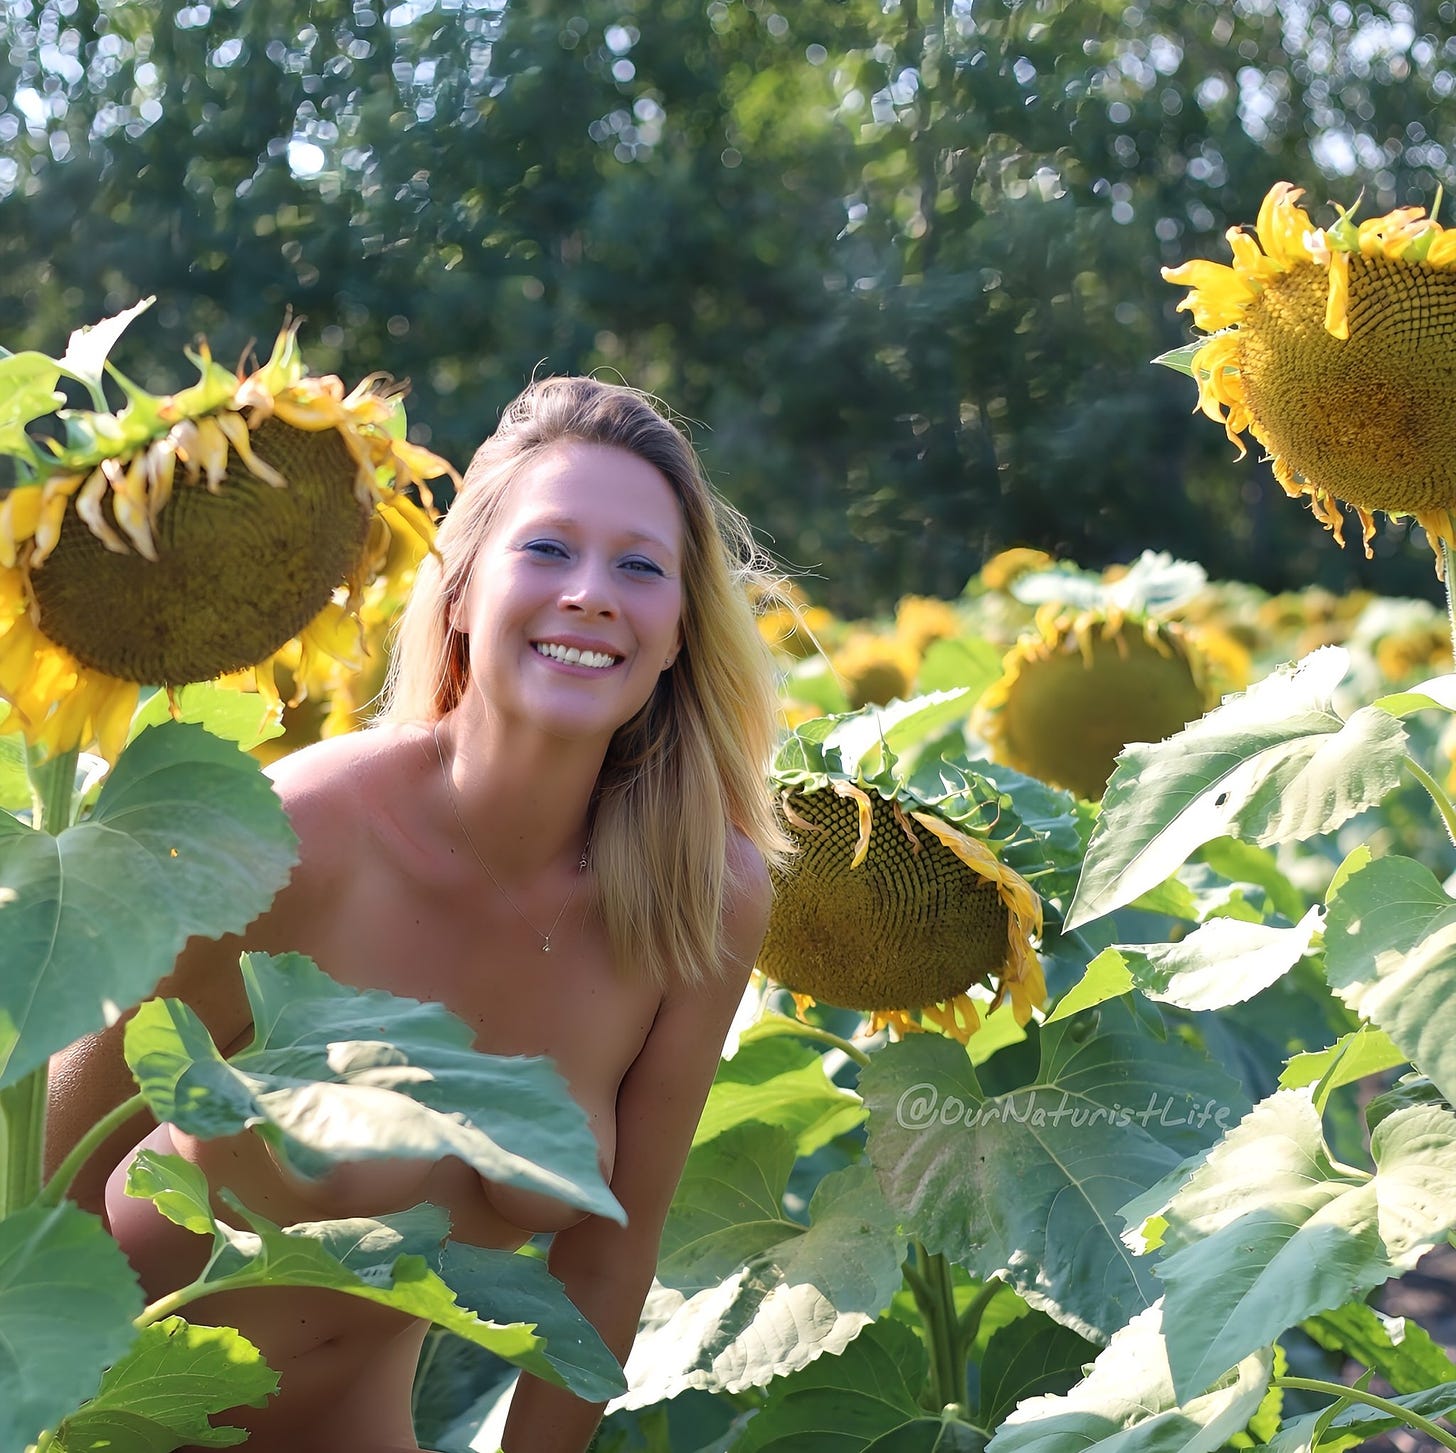 Photo of Corin in a sunflower field supplied by and used with the kind permission of Kevin and Corin at OurNaturistLife: